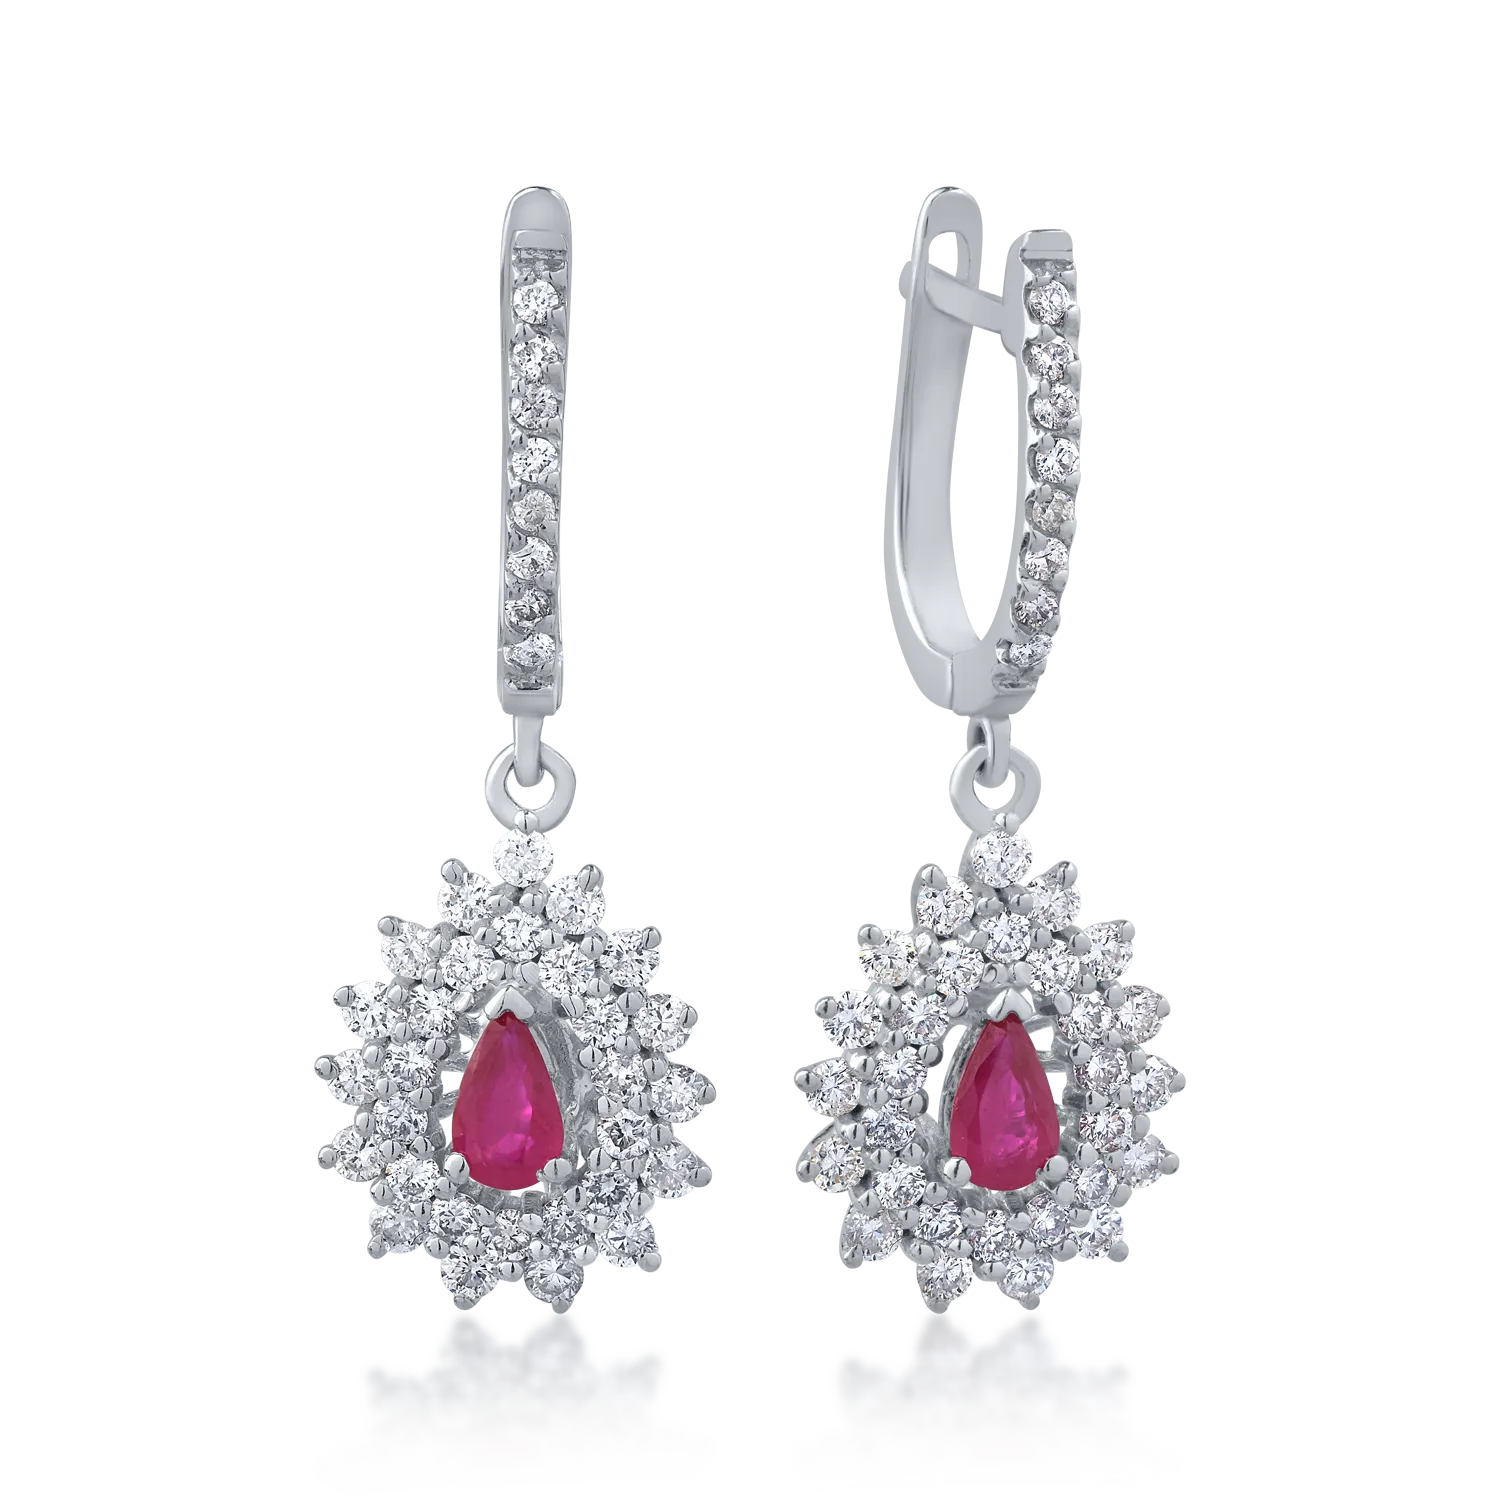 18K white gold earrings with 0.4ct rubies and 0.97ct diamonds